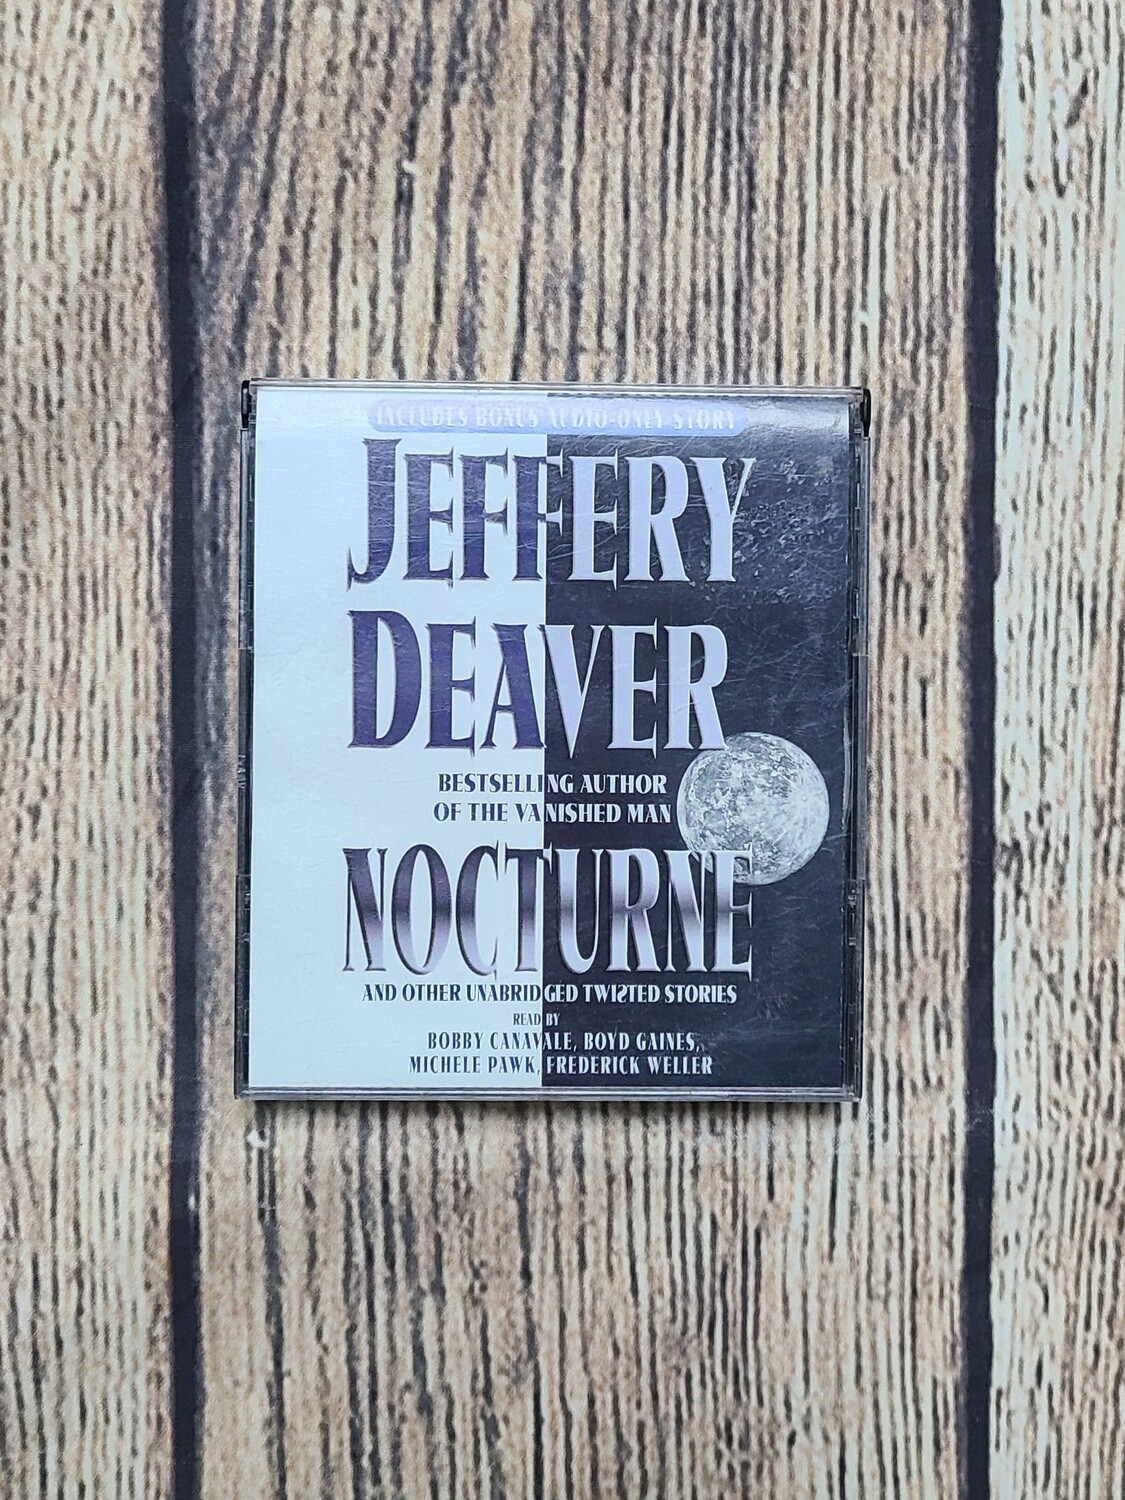 Nocturne and Other Unabridged Twisted Stories by Jeffery Deaver Audiobook